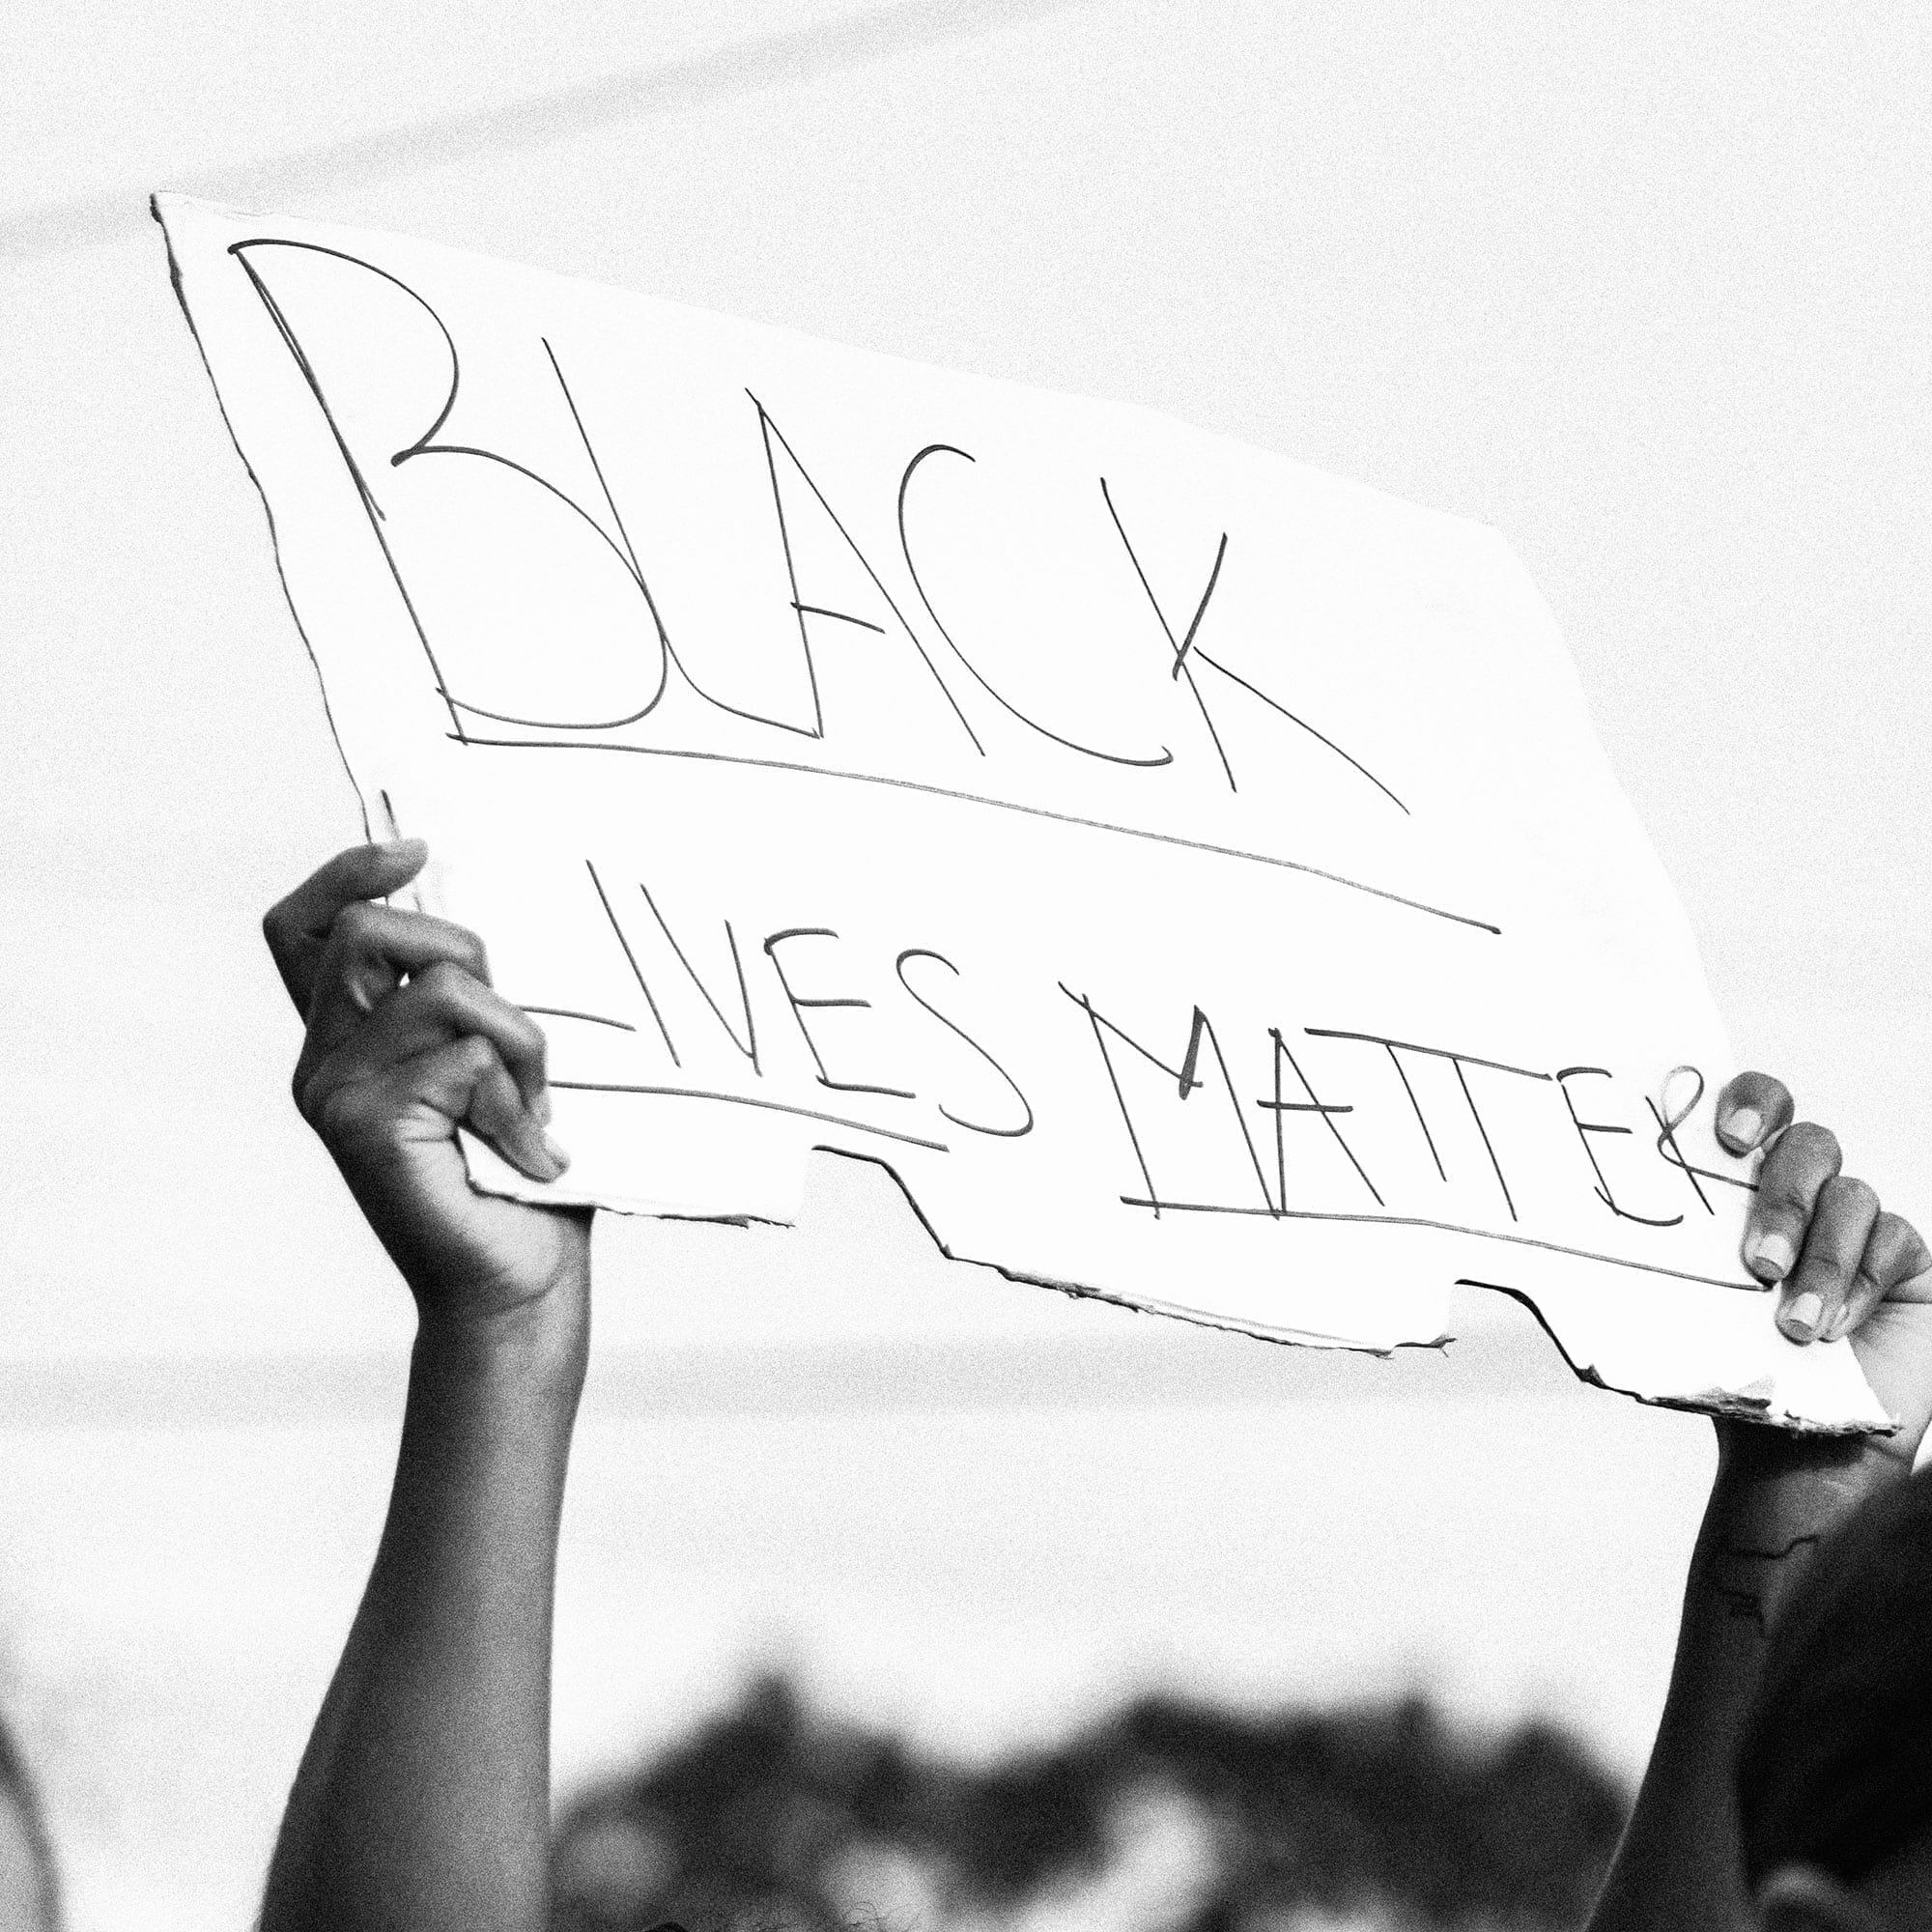 Person holds a sign in the air that reads "Black Lives Matter" at a protest.